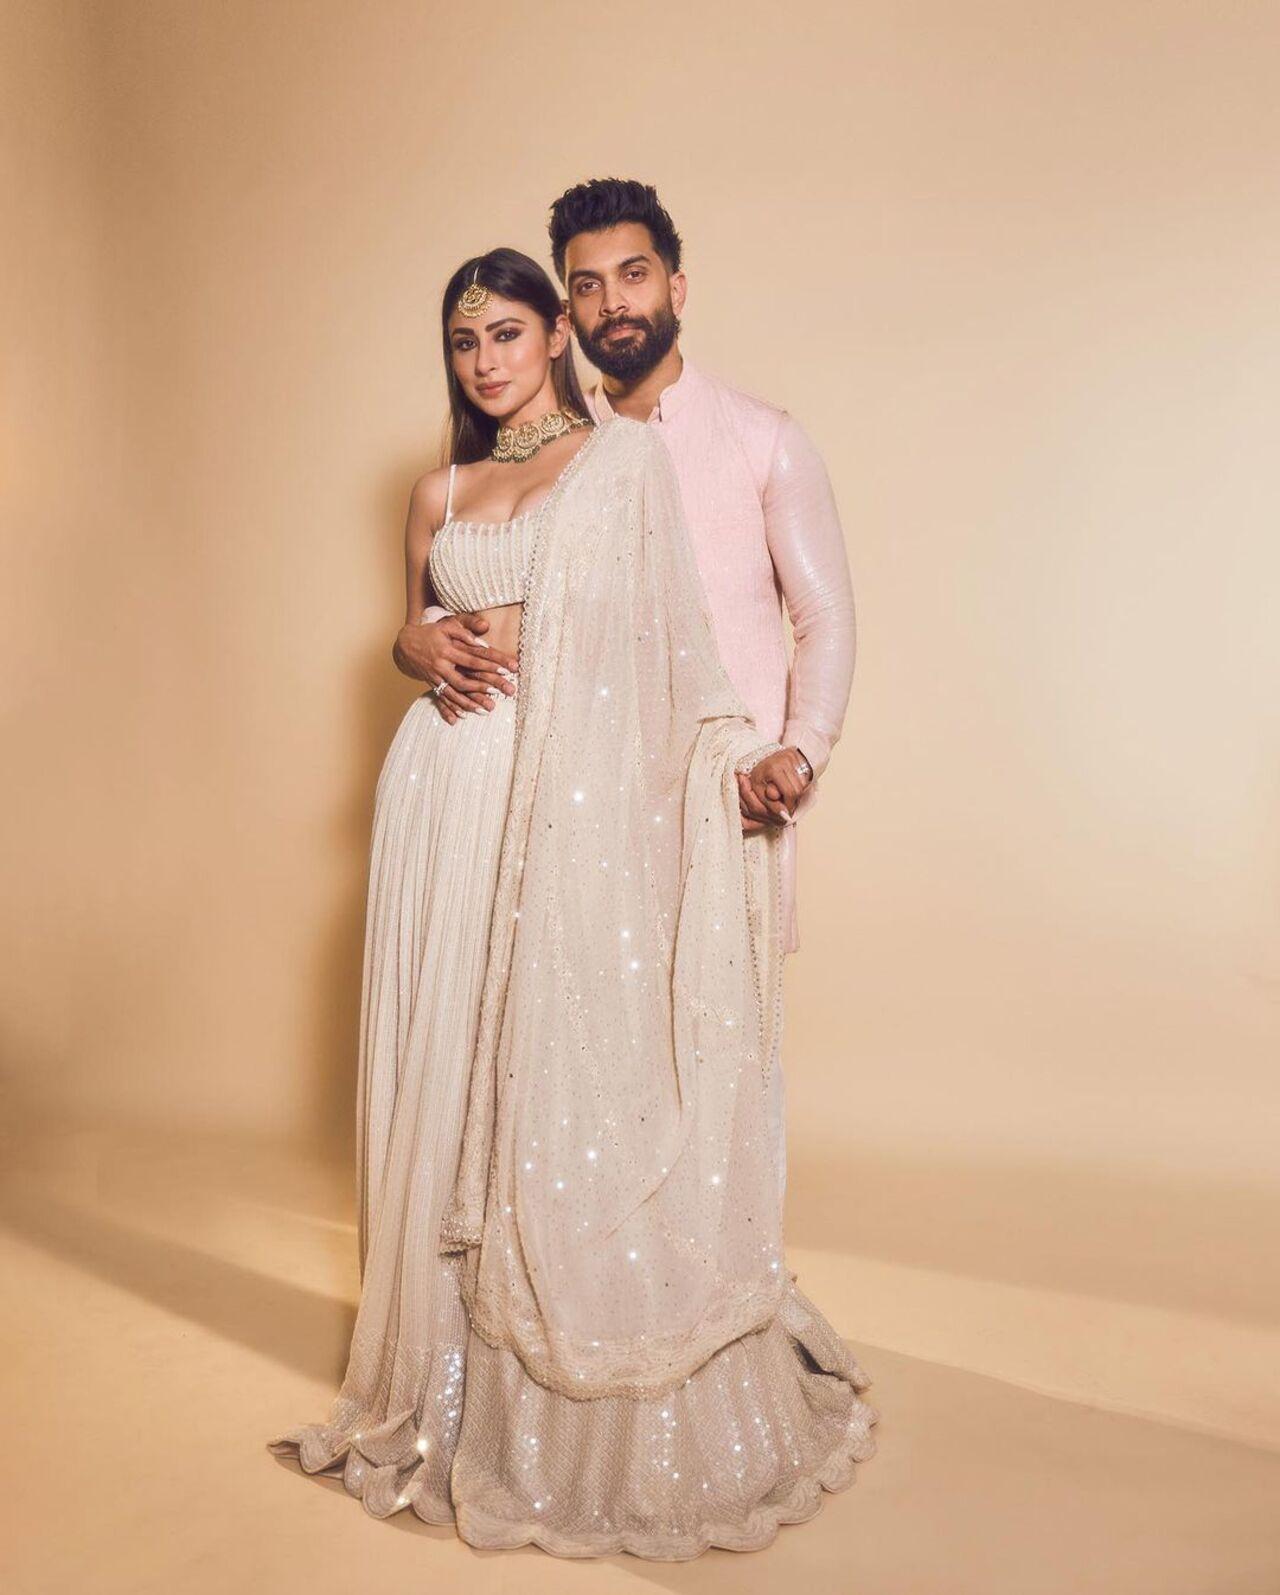 Mouni Roy shared stunning pictures with her husband, Suraj Nambiar on Instagram on Diwali 2023